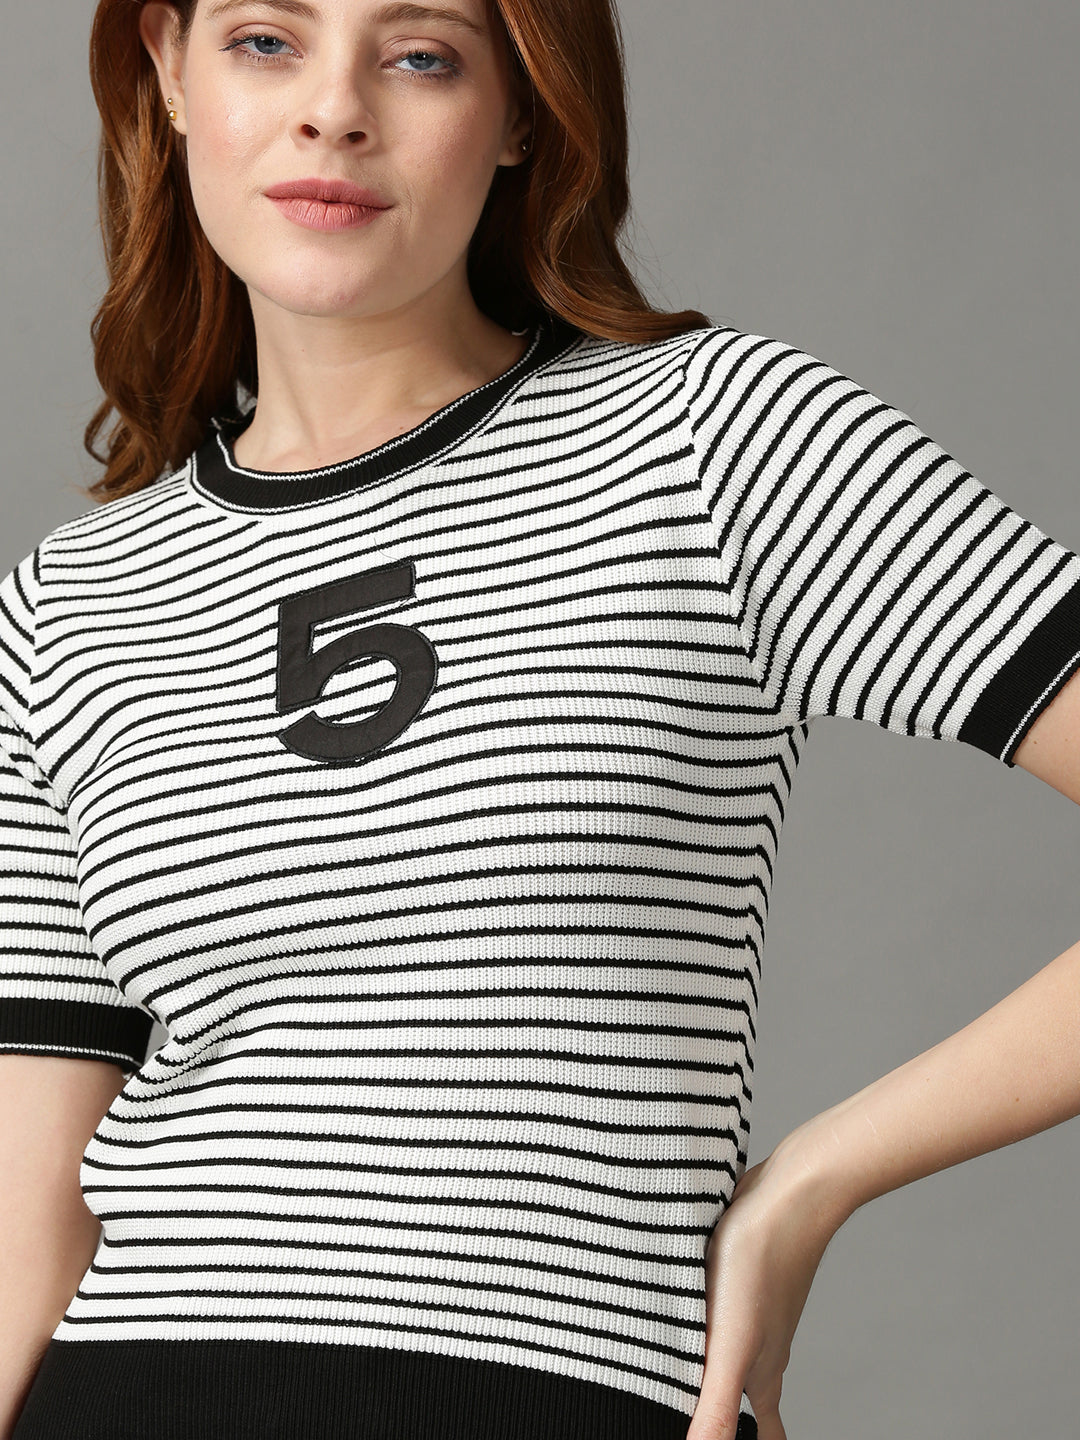 Women's White Striped Fitted Top